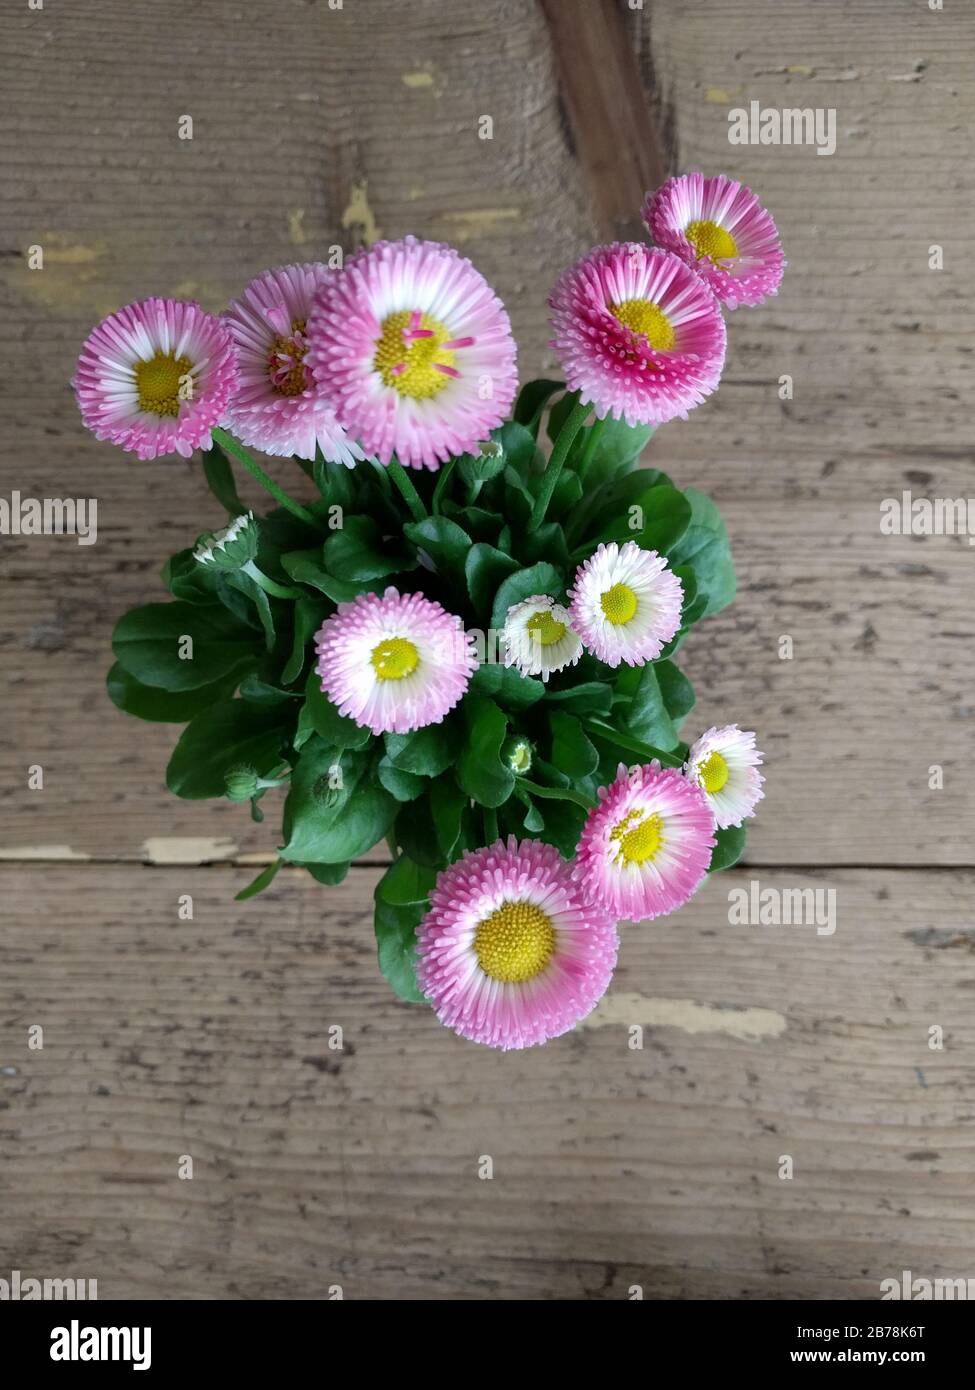 Daisy pomponette with pink flower head Stock Photo